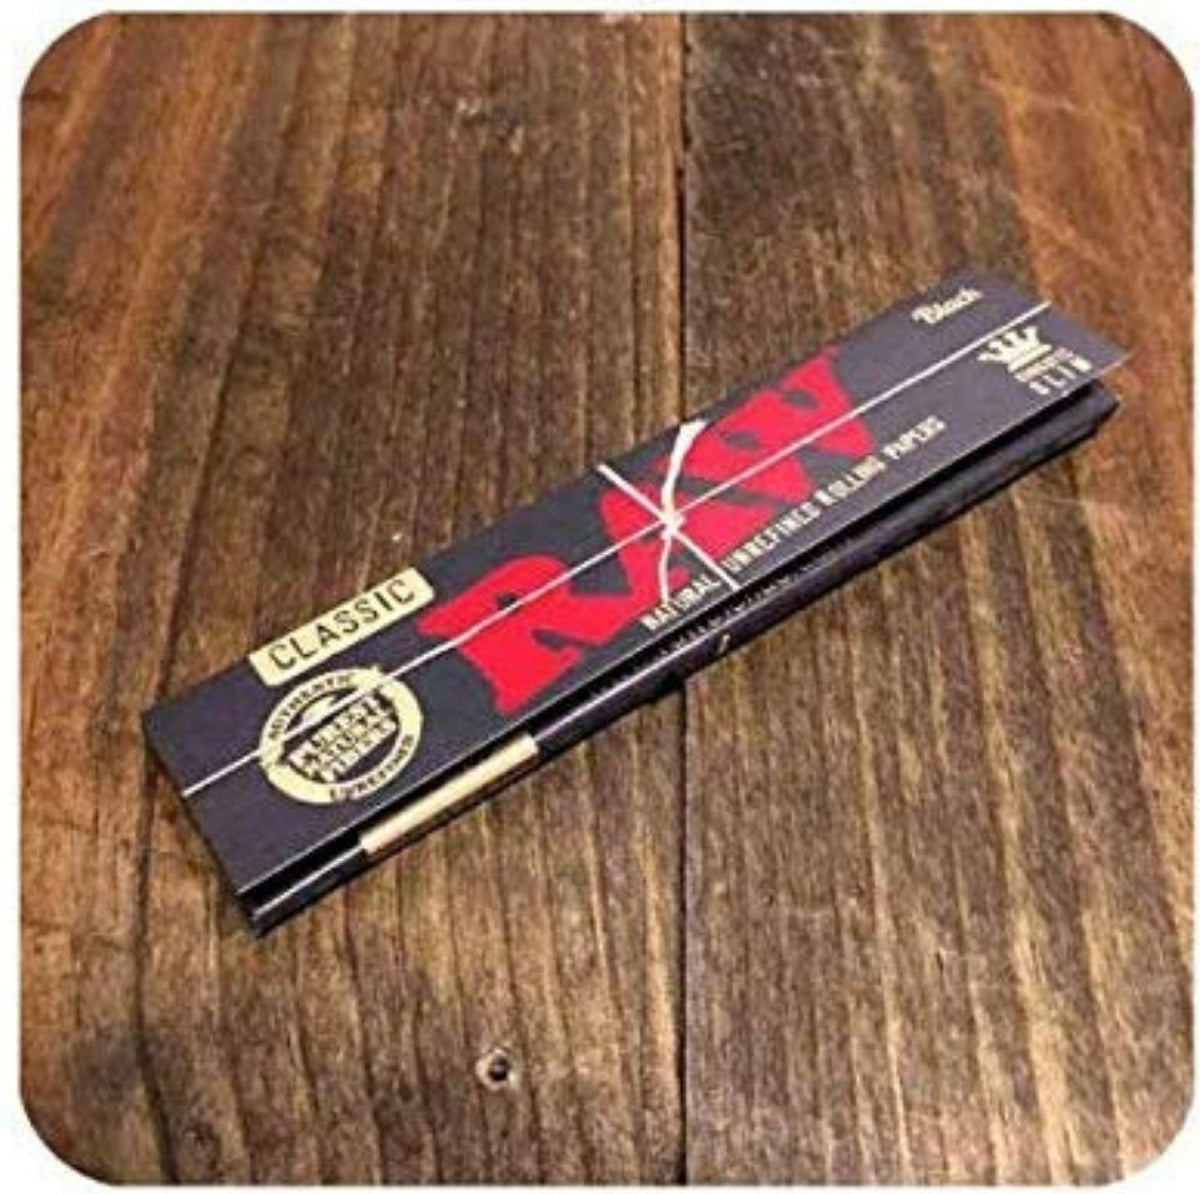 RAW Black Rolling Paper with RAW Wide Perforated Tips - Set of 4